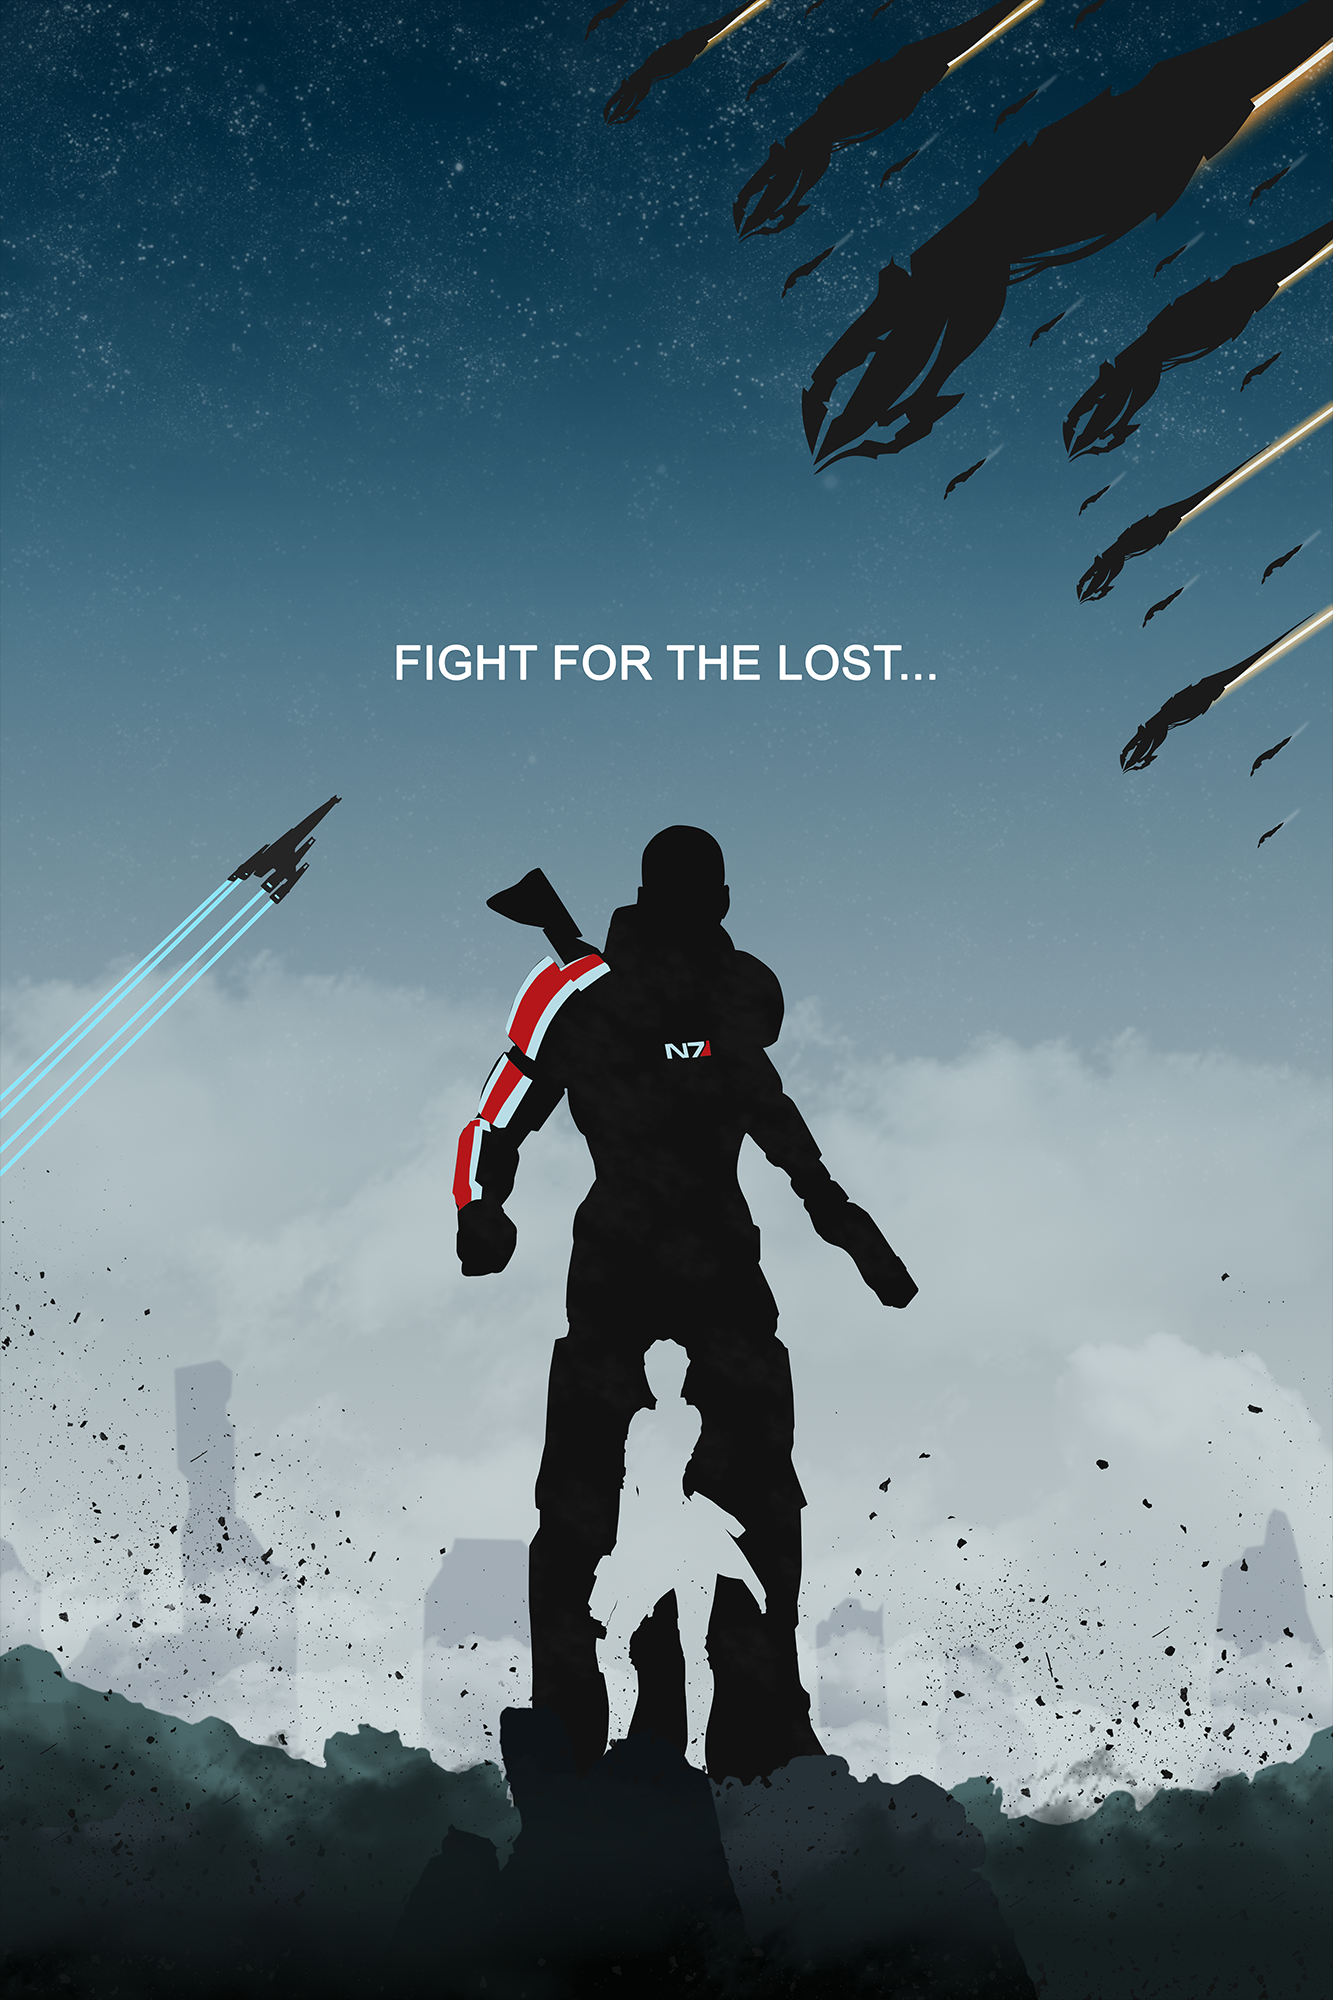 mass_effect___fight_for_the_lost_by_azum